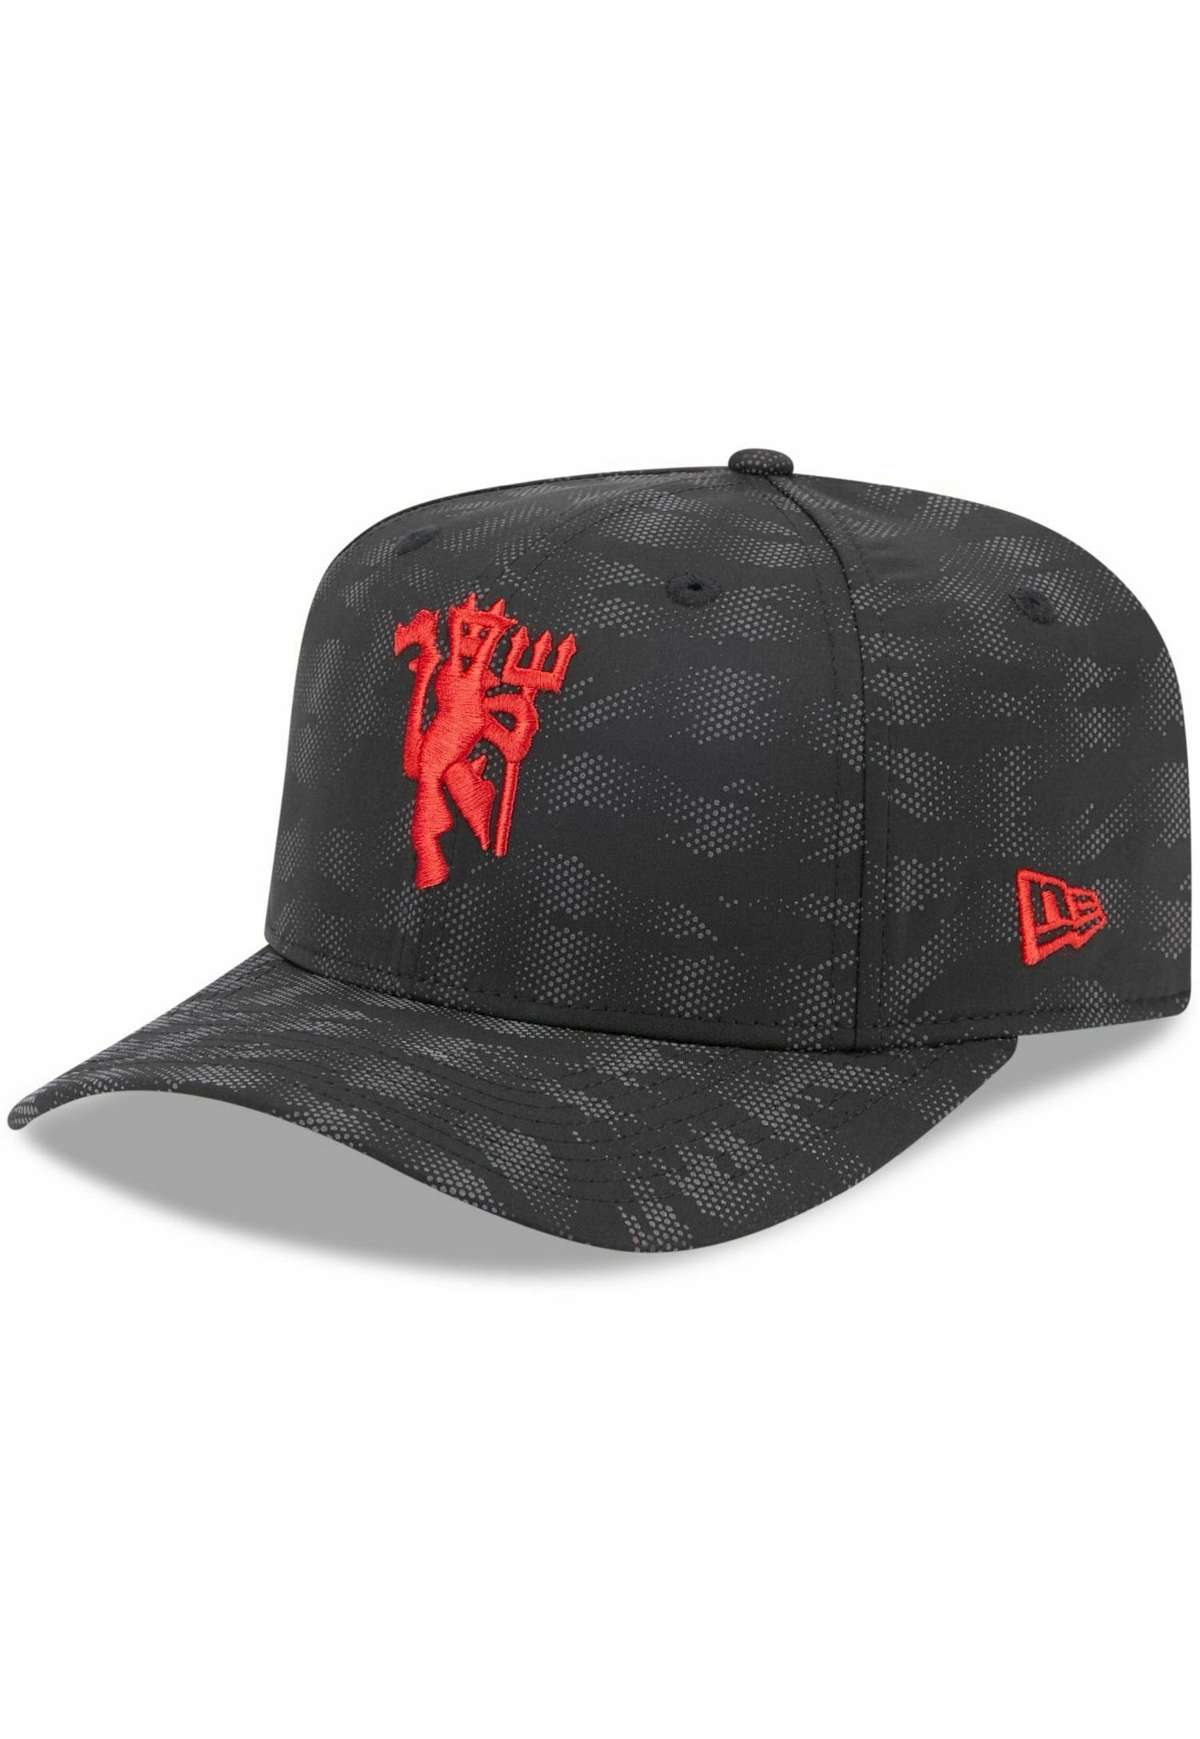 Кепка 9FIFTY STRETCH-SNAP -REFLACT MANCHESTER UNITED